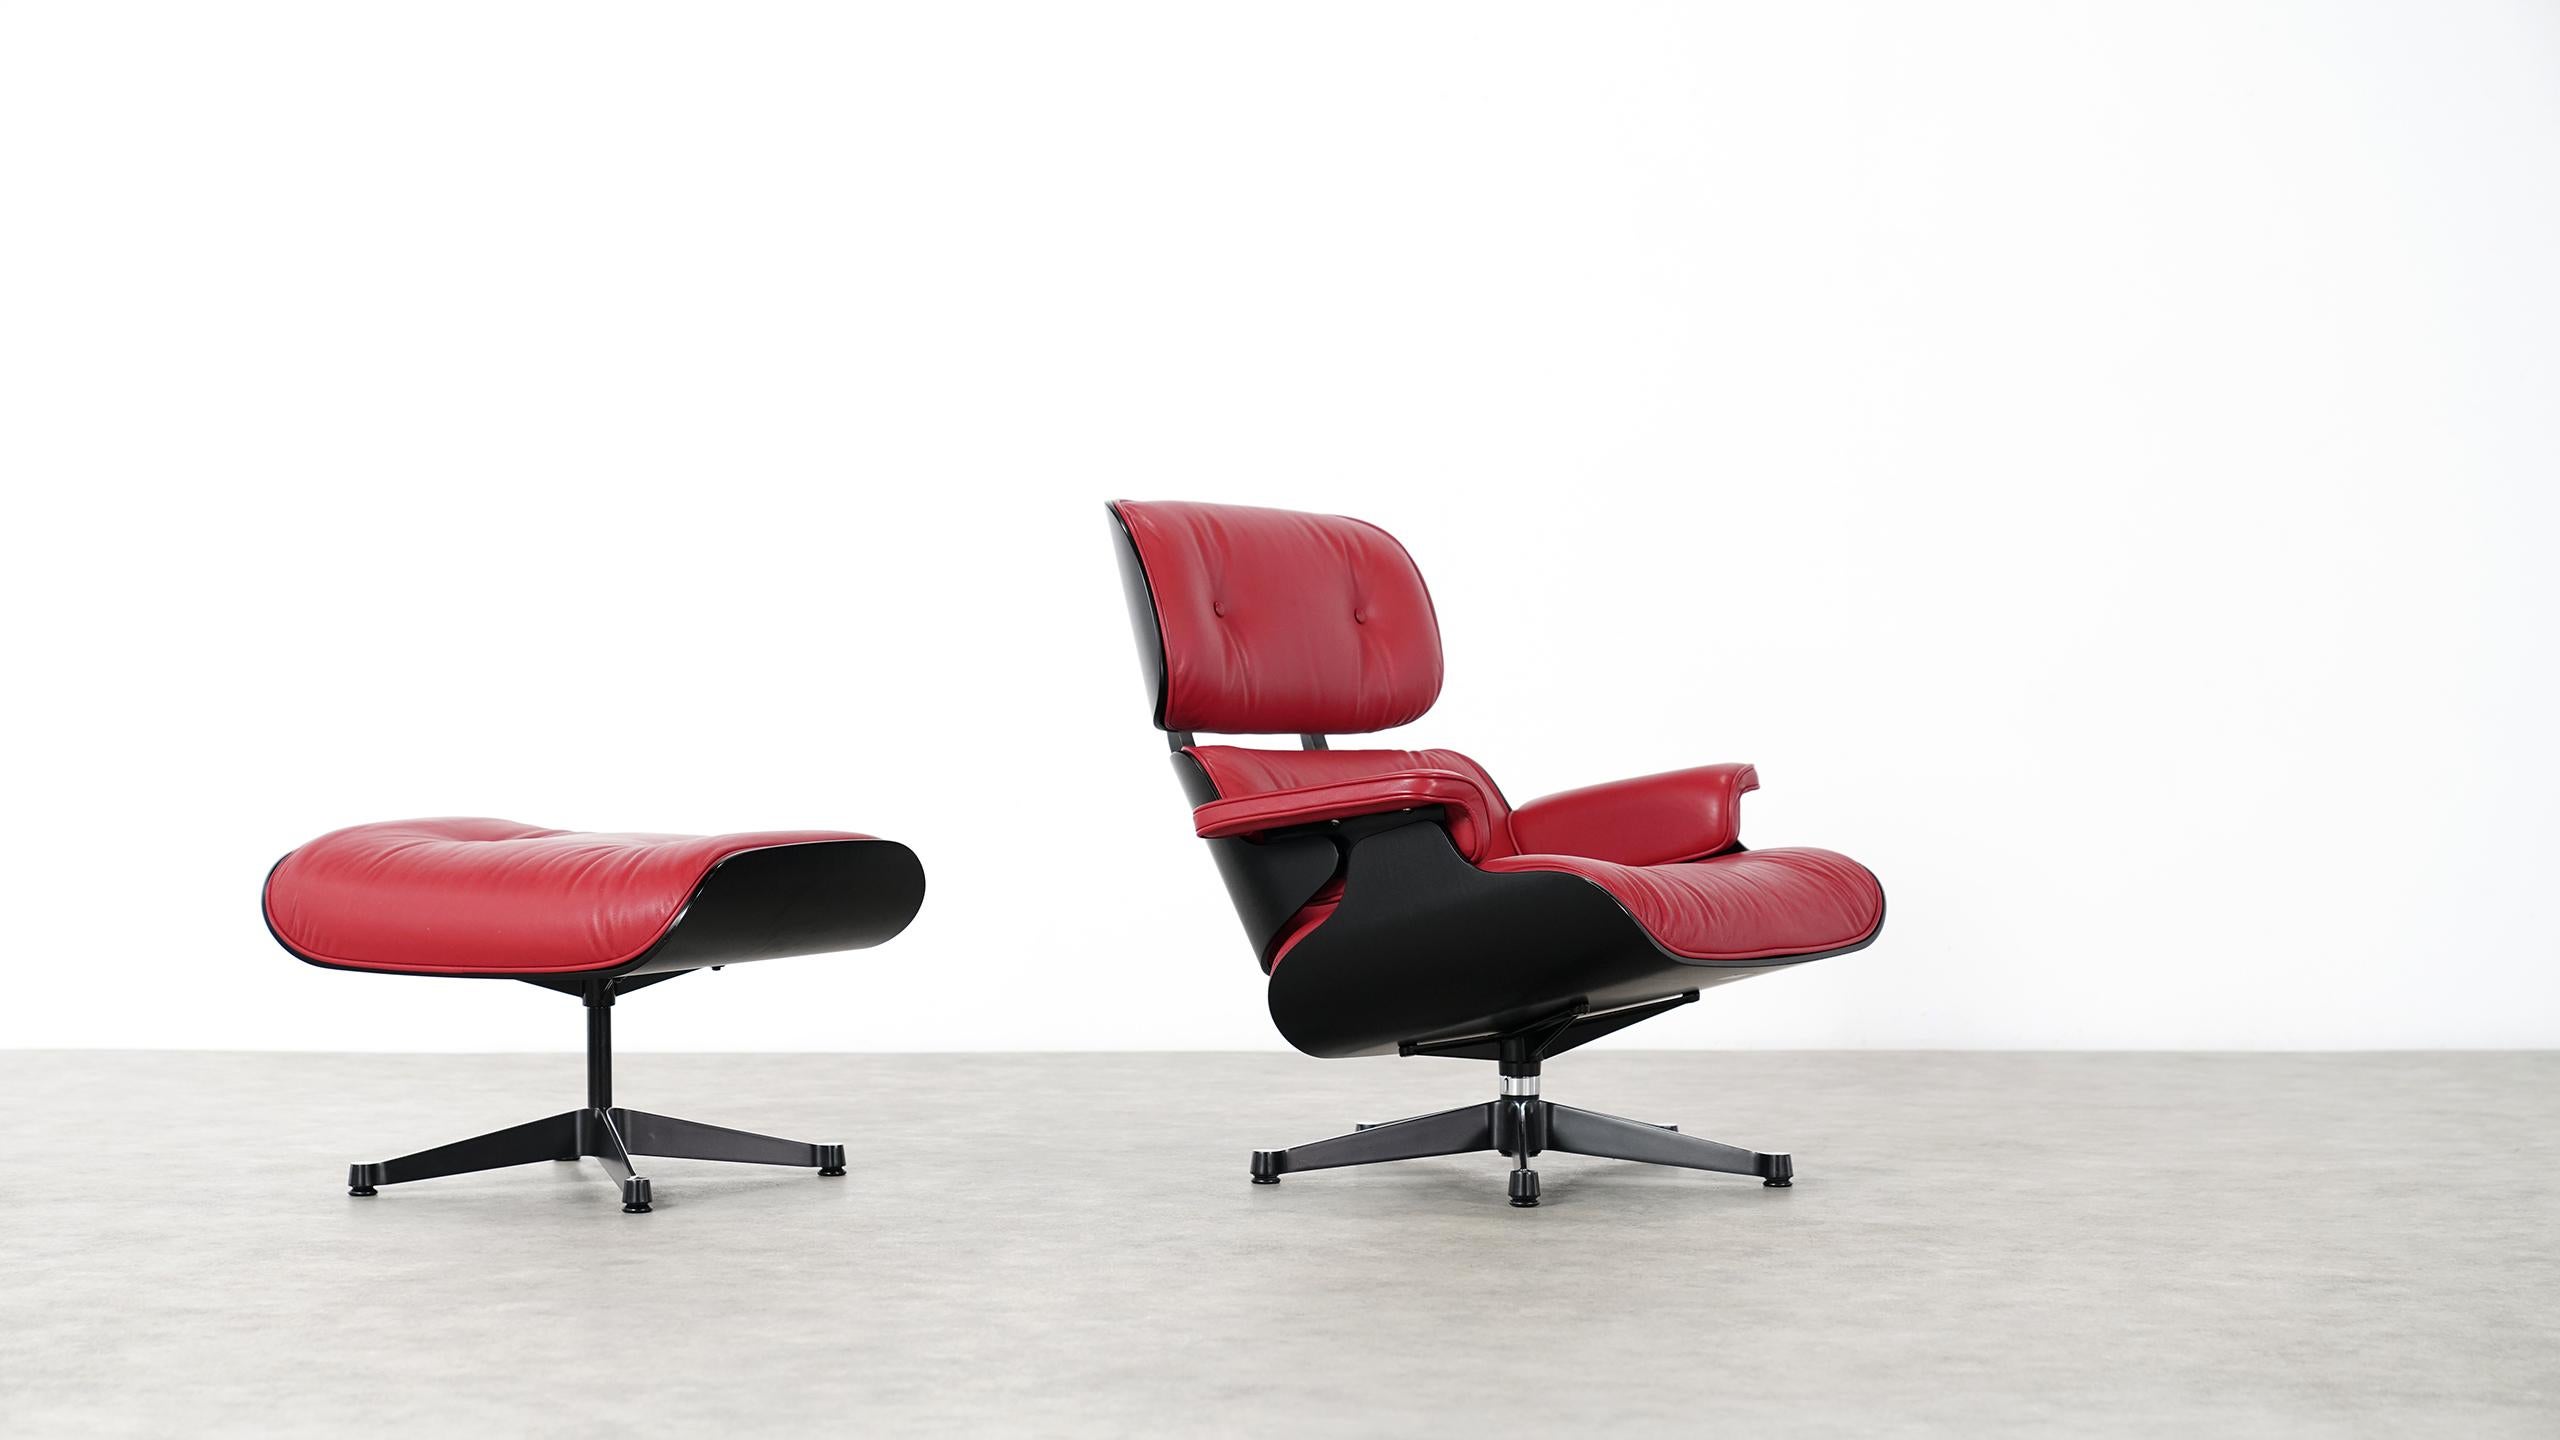 Vitra Charles Eames Lounge Chair and Ottoman by Vitra Red Leather, Black Shells 2